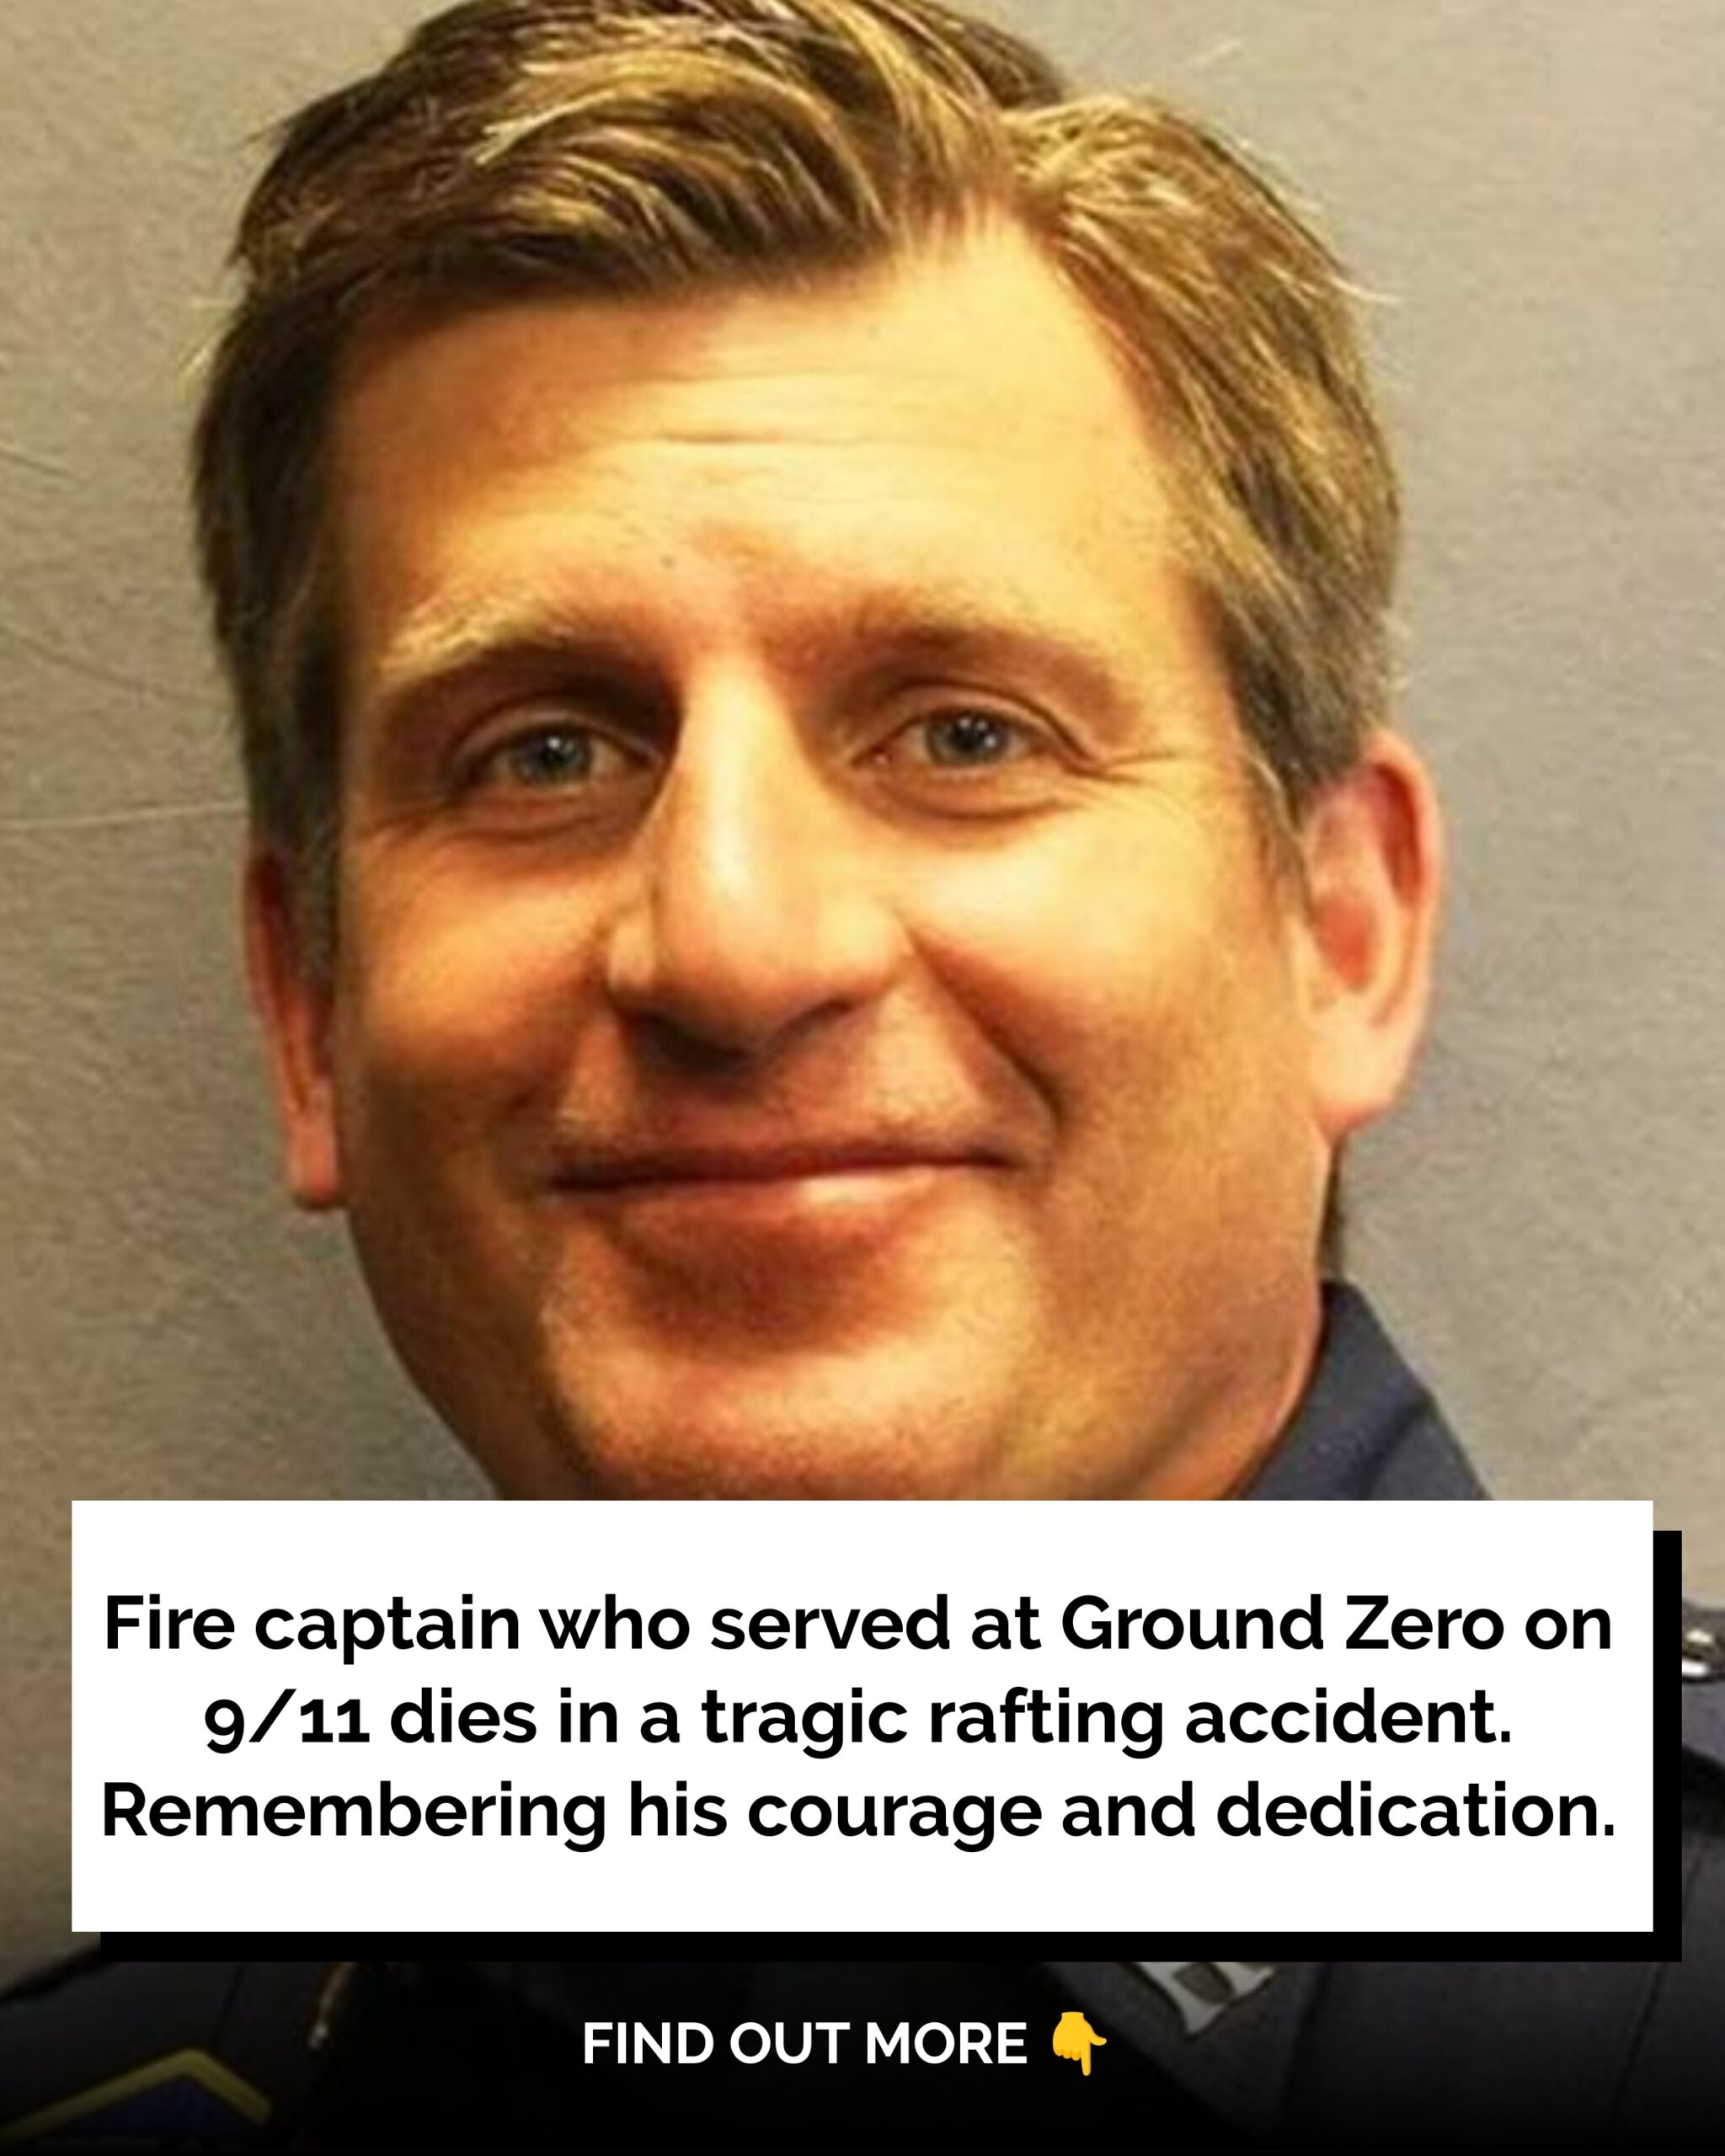 Fire Captain Who Was Deployed to Ground Zero on 9/11 Dies After Being Pinned Under Boat on Rafting Trip